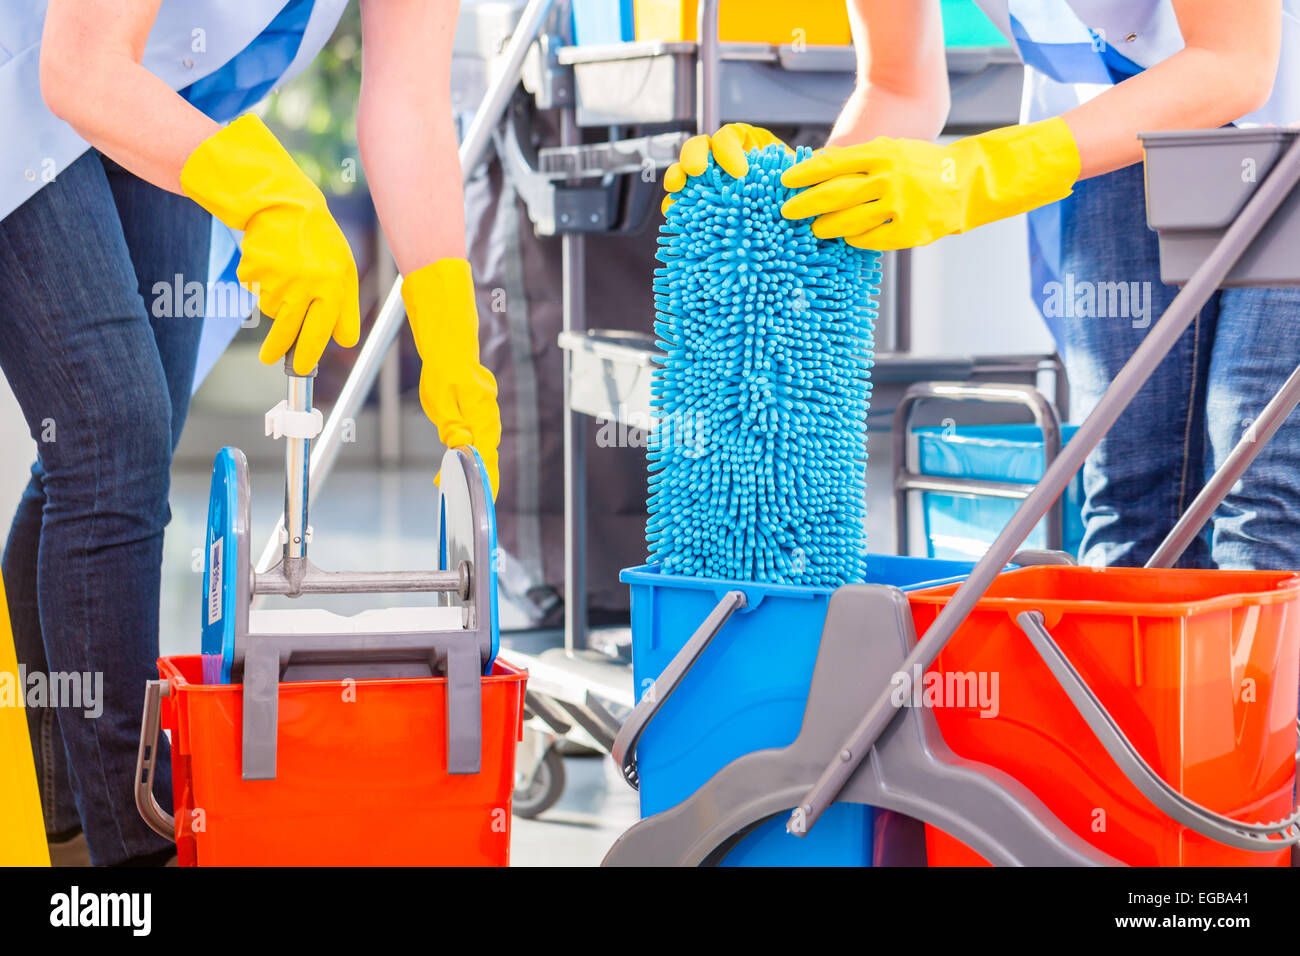 Cleaning ladies mopping floor, close up on hands and tools Stock Photo